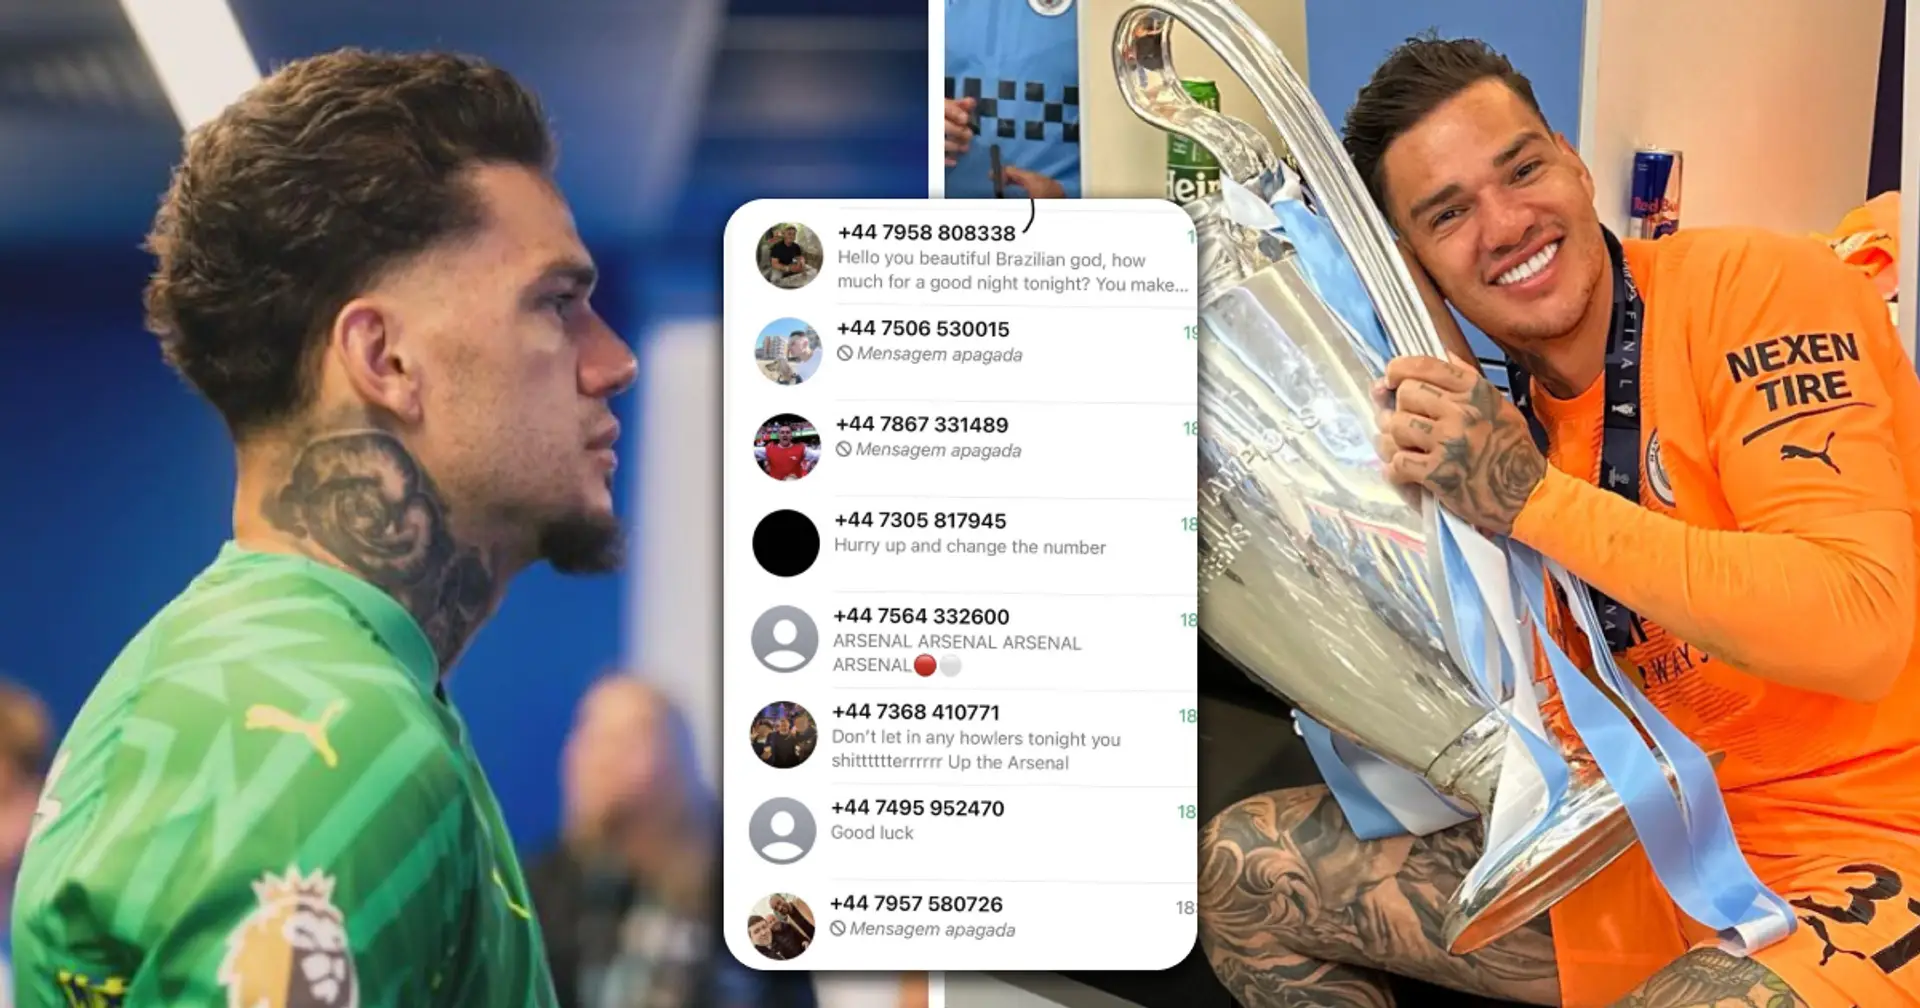 'I am messaging all of these back': Man City fans prepared to start cyber war after Ederson's phone number was leaked 